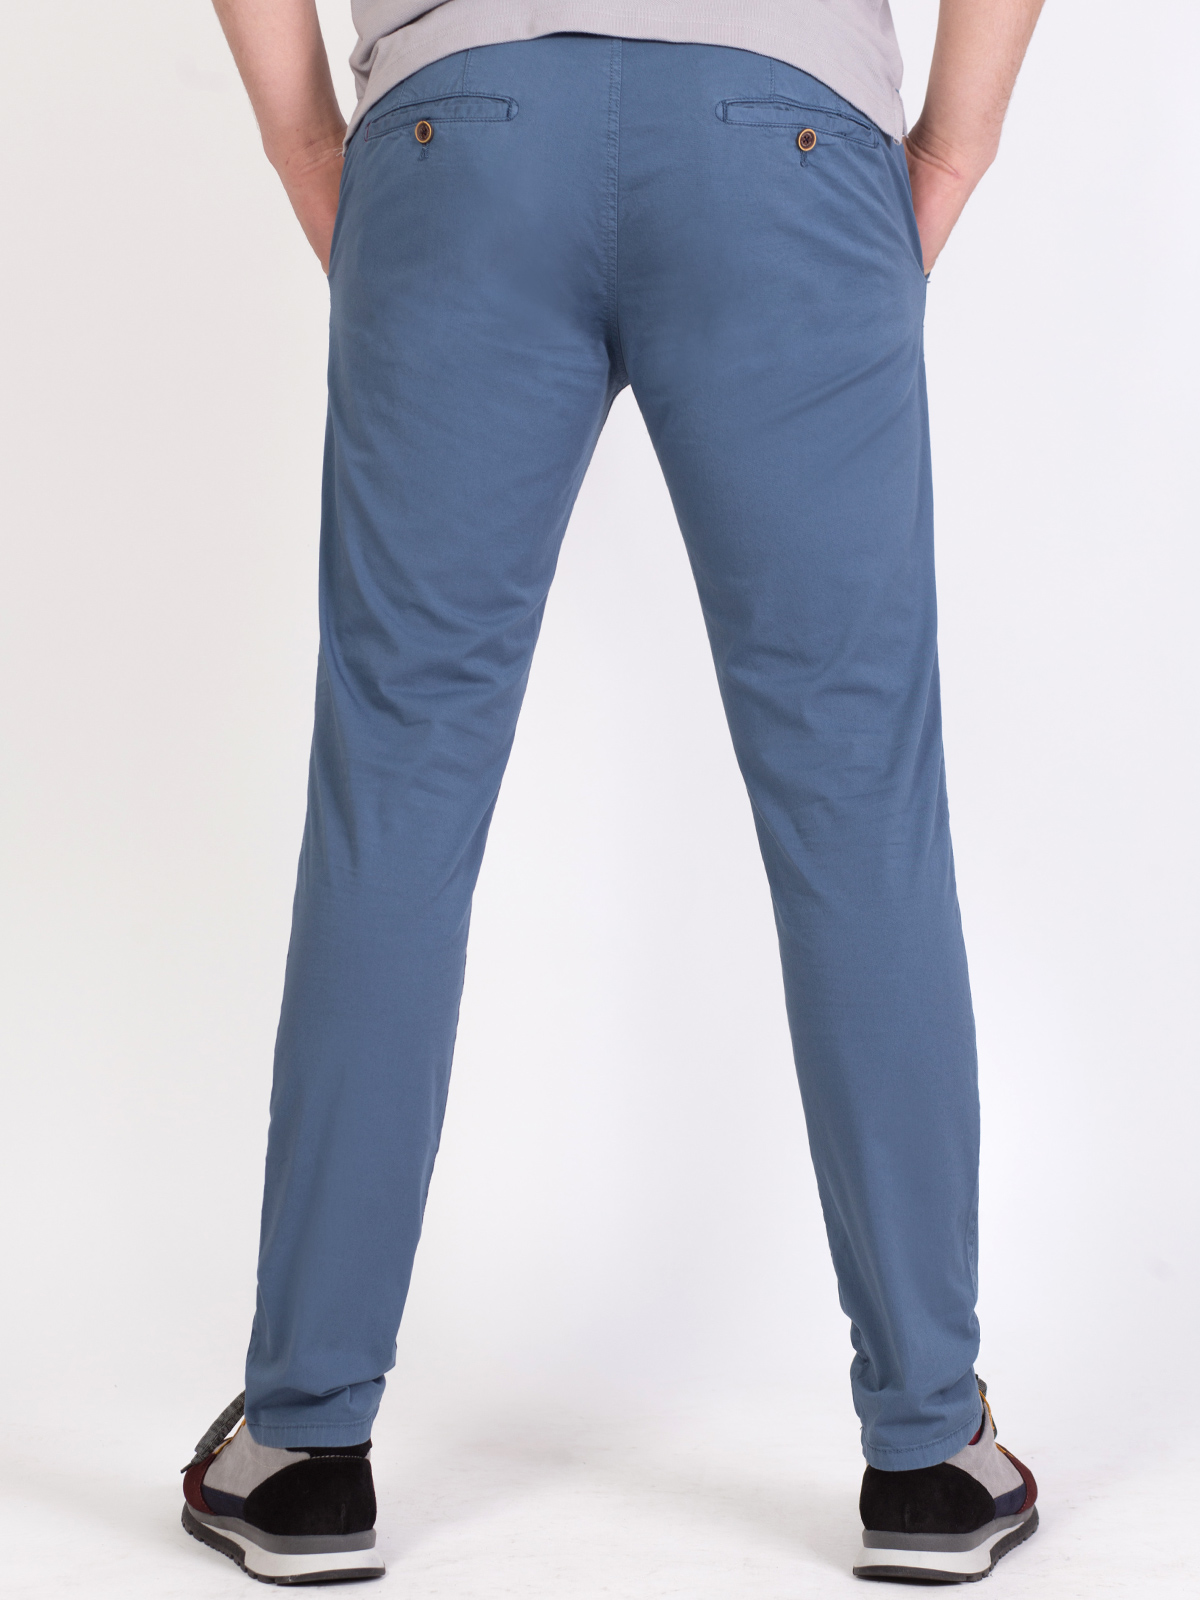 Fitted trousers in light blue - 63312 € 49.49 img3